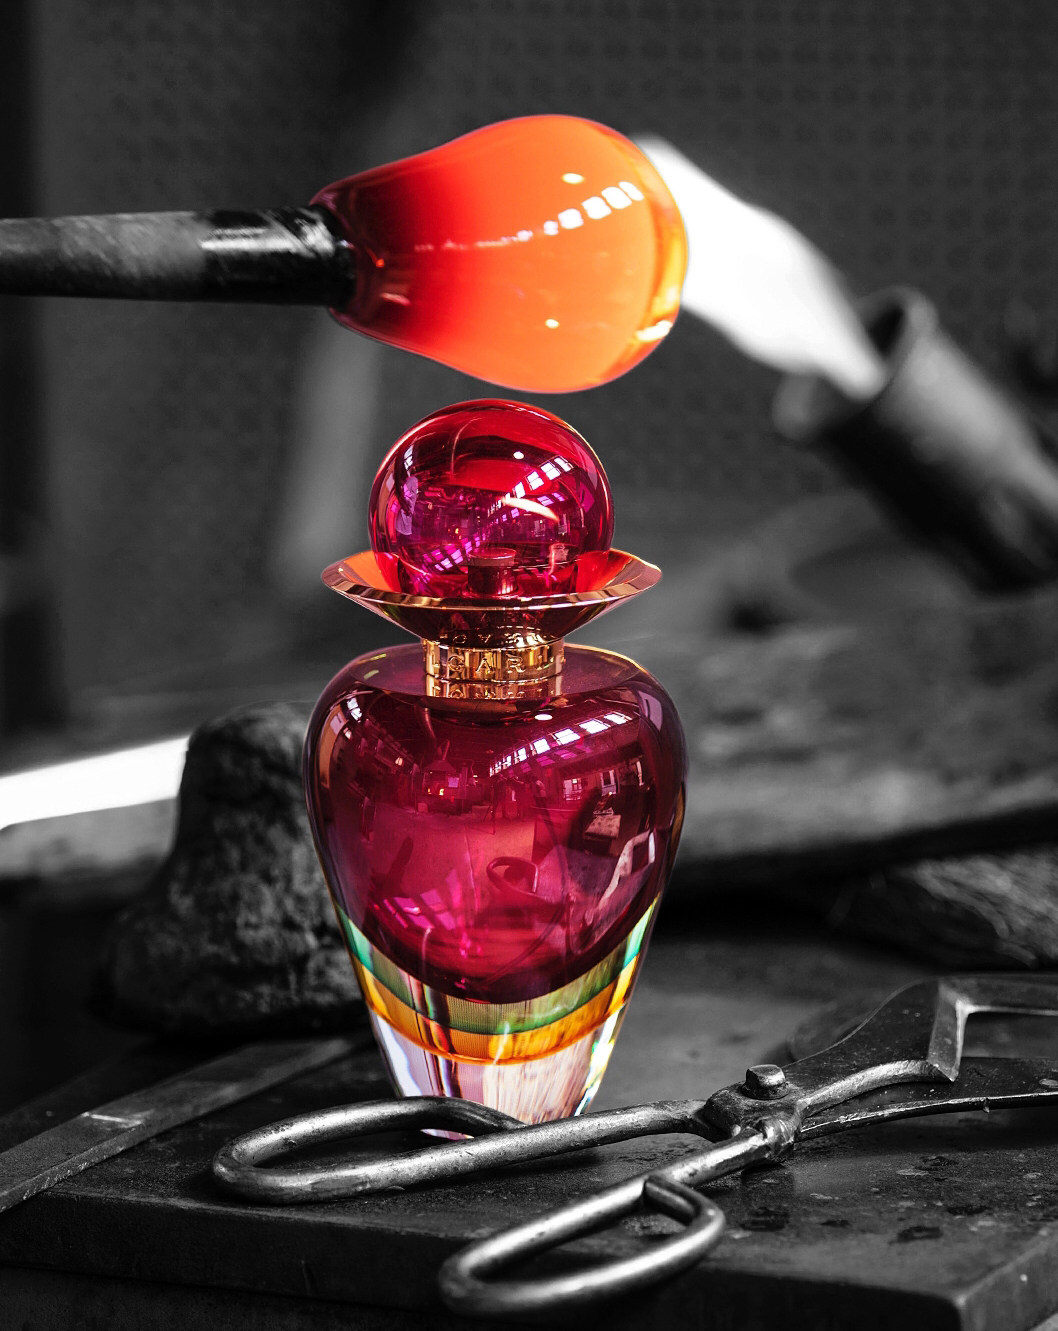 BVLGARI LE GEMME MURANO COLLECTION